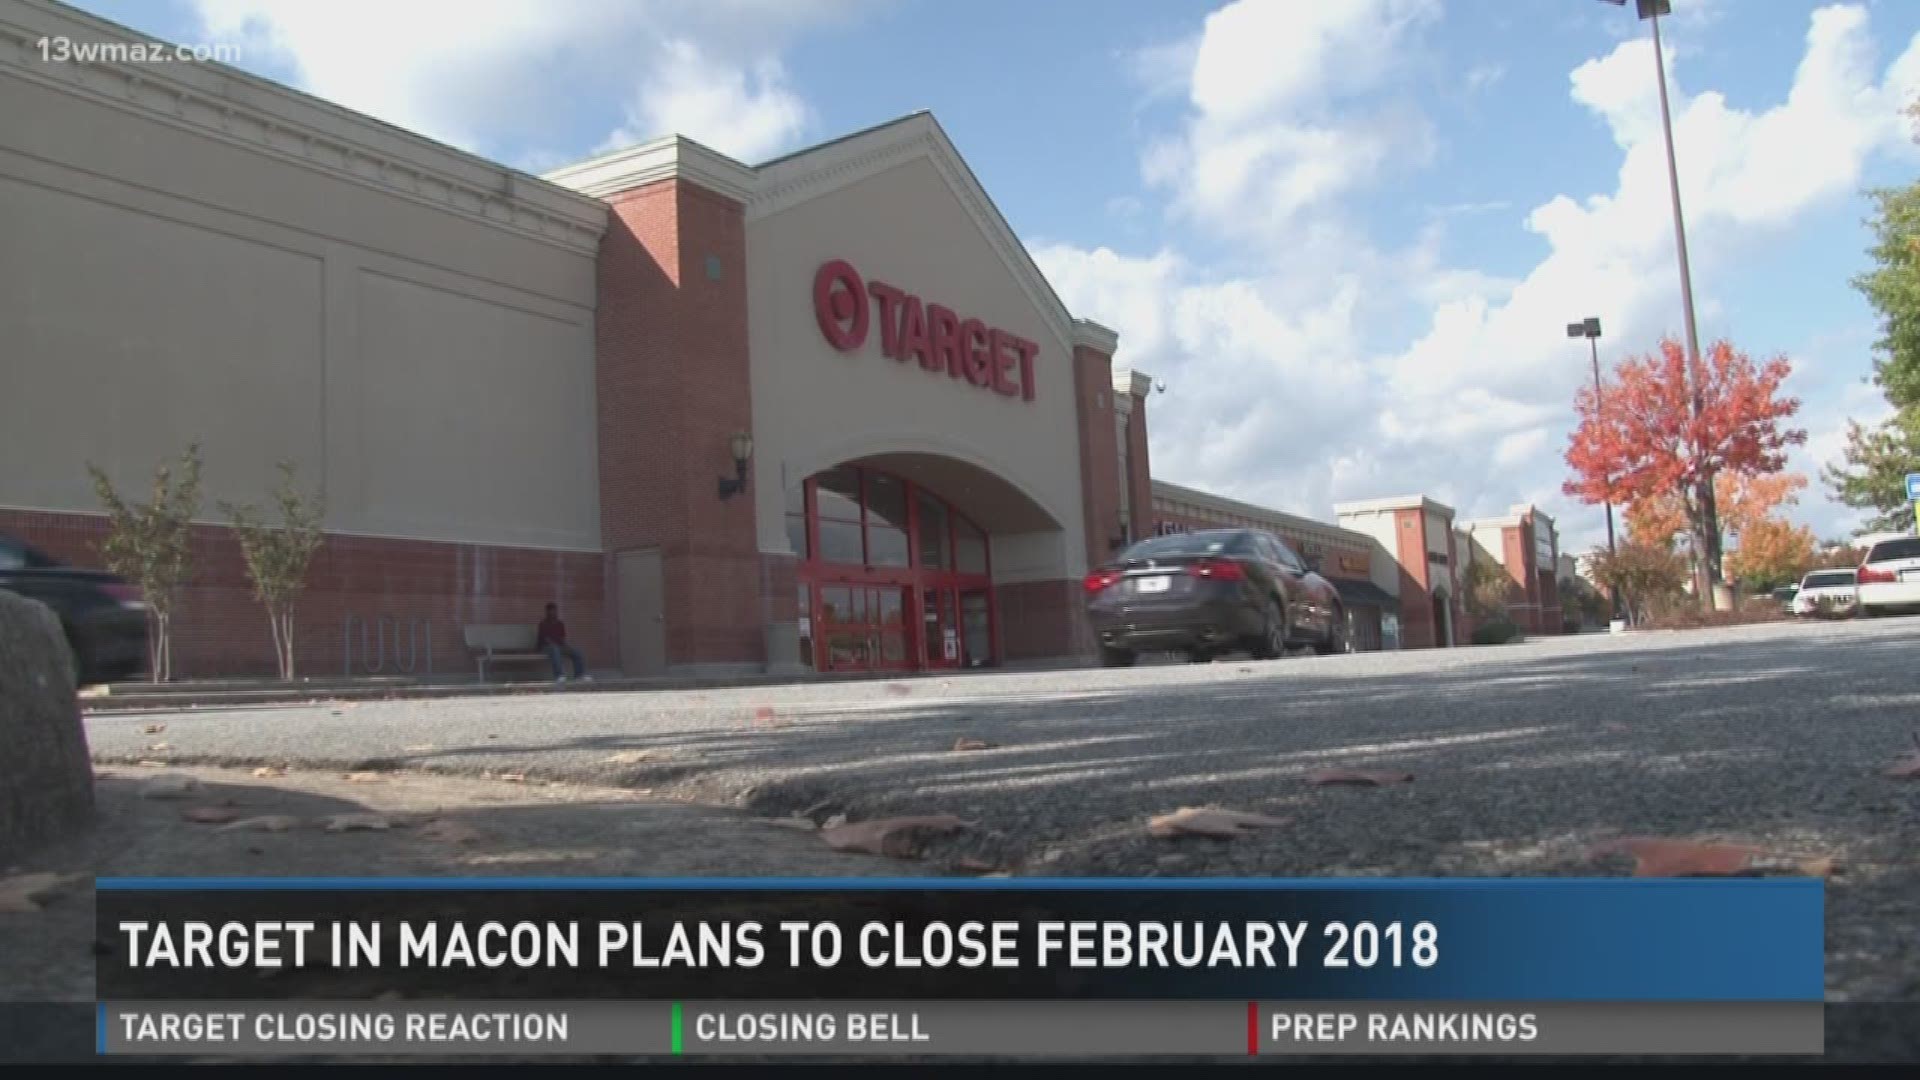 Macon Target to close in February 2018